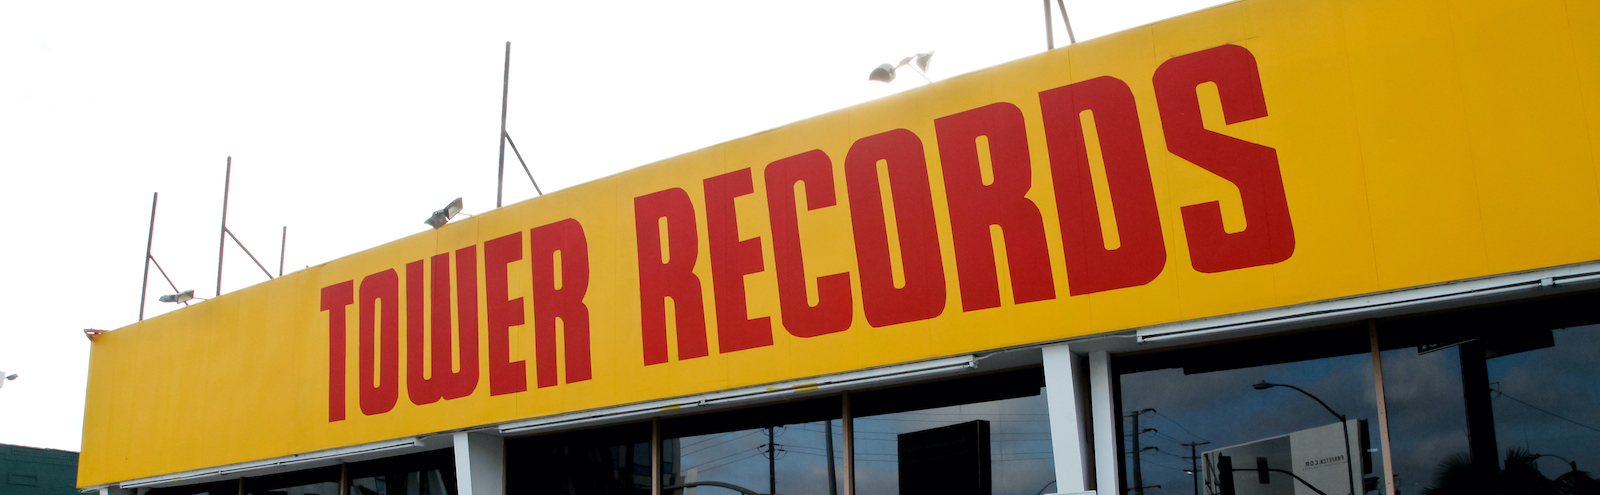 Tower Records Makes Its Return By Relaunching As An Online Store | Honk ...